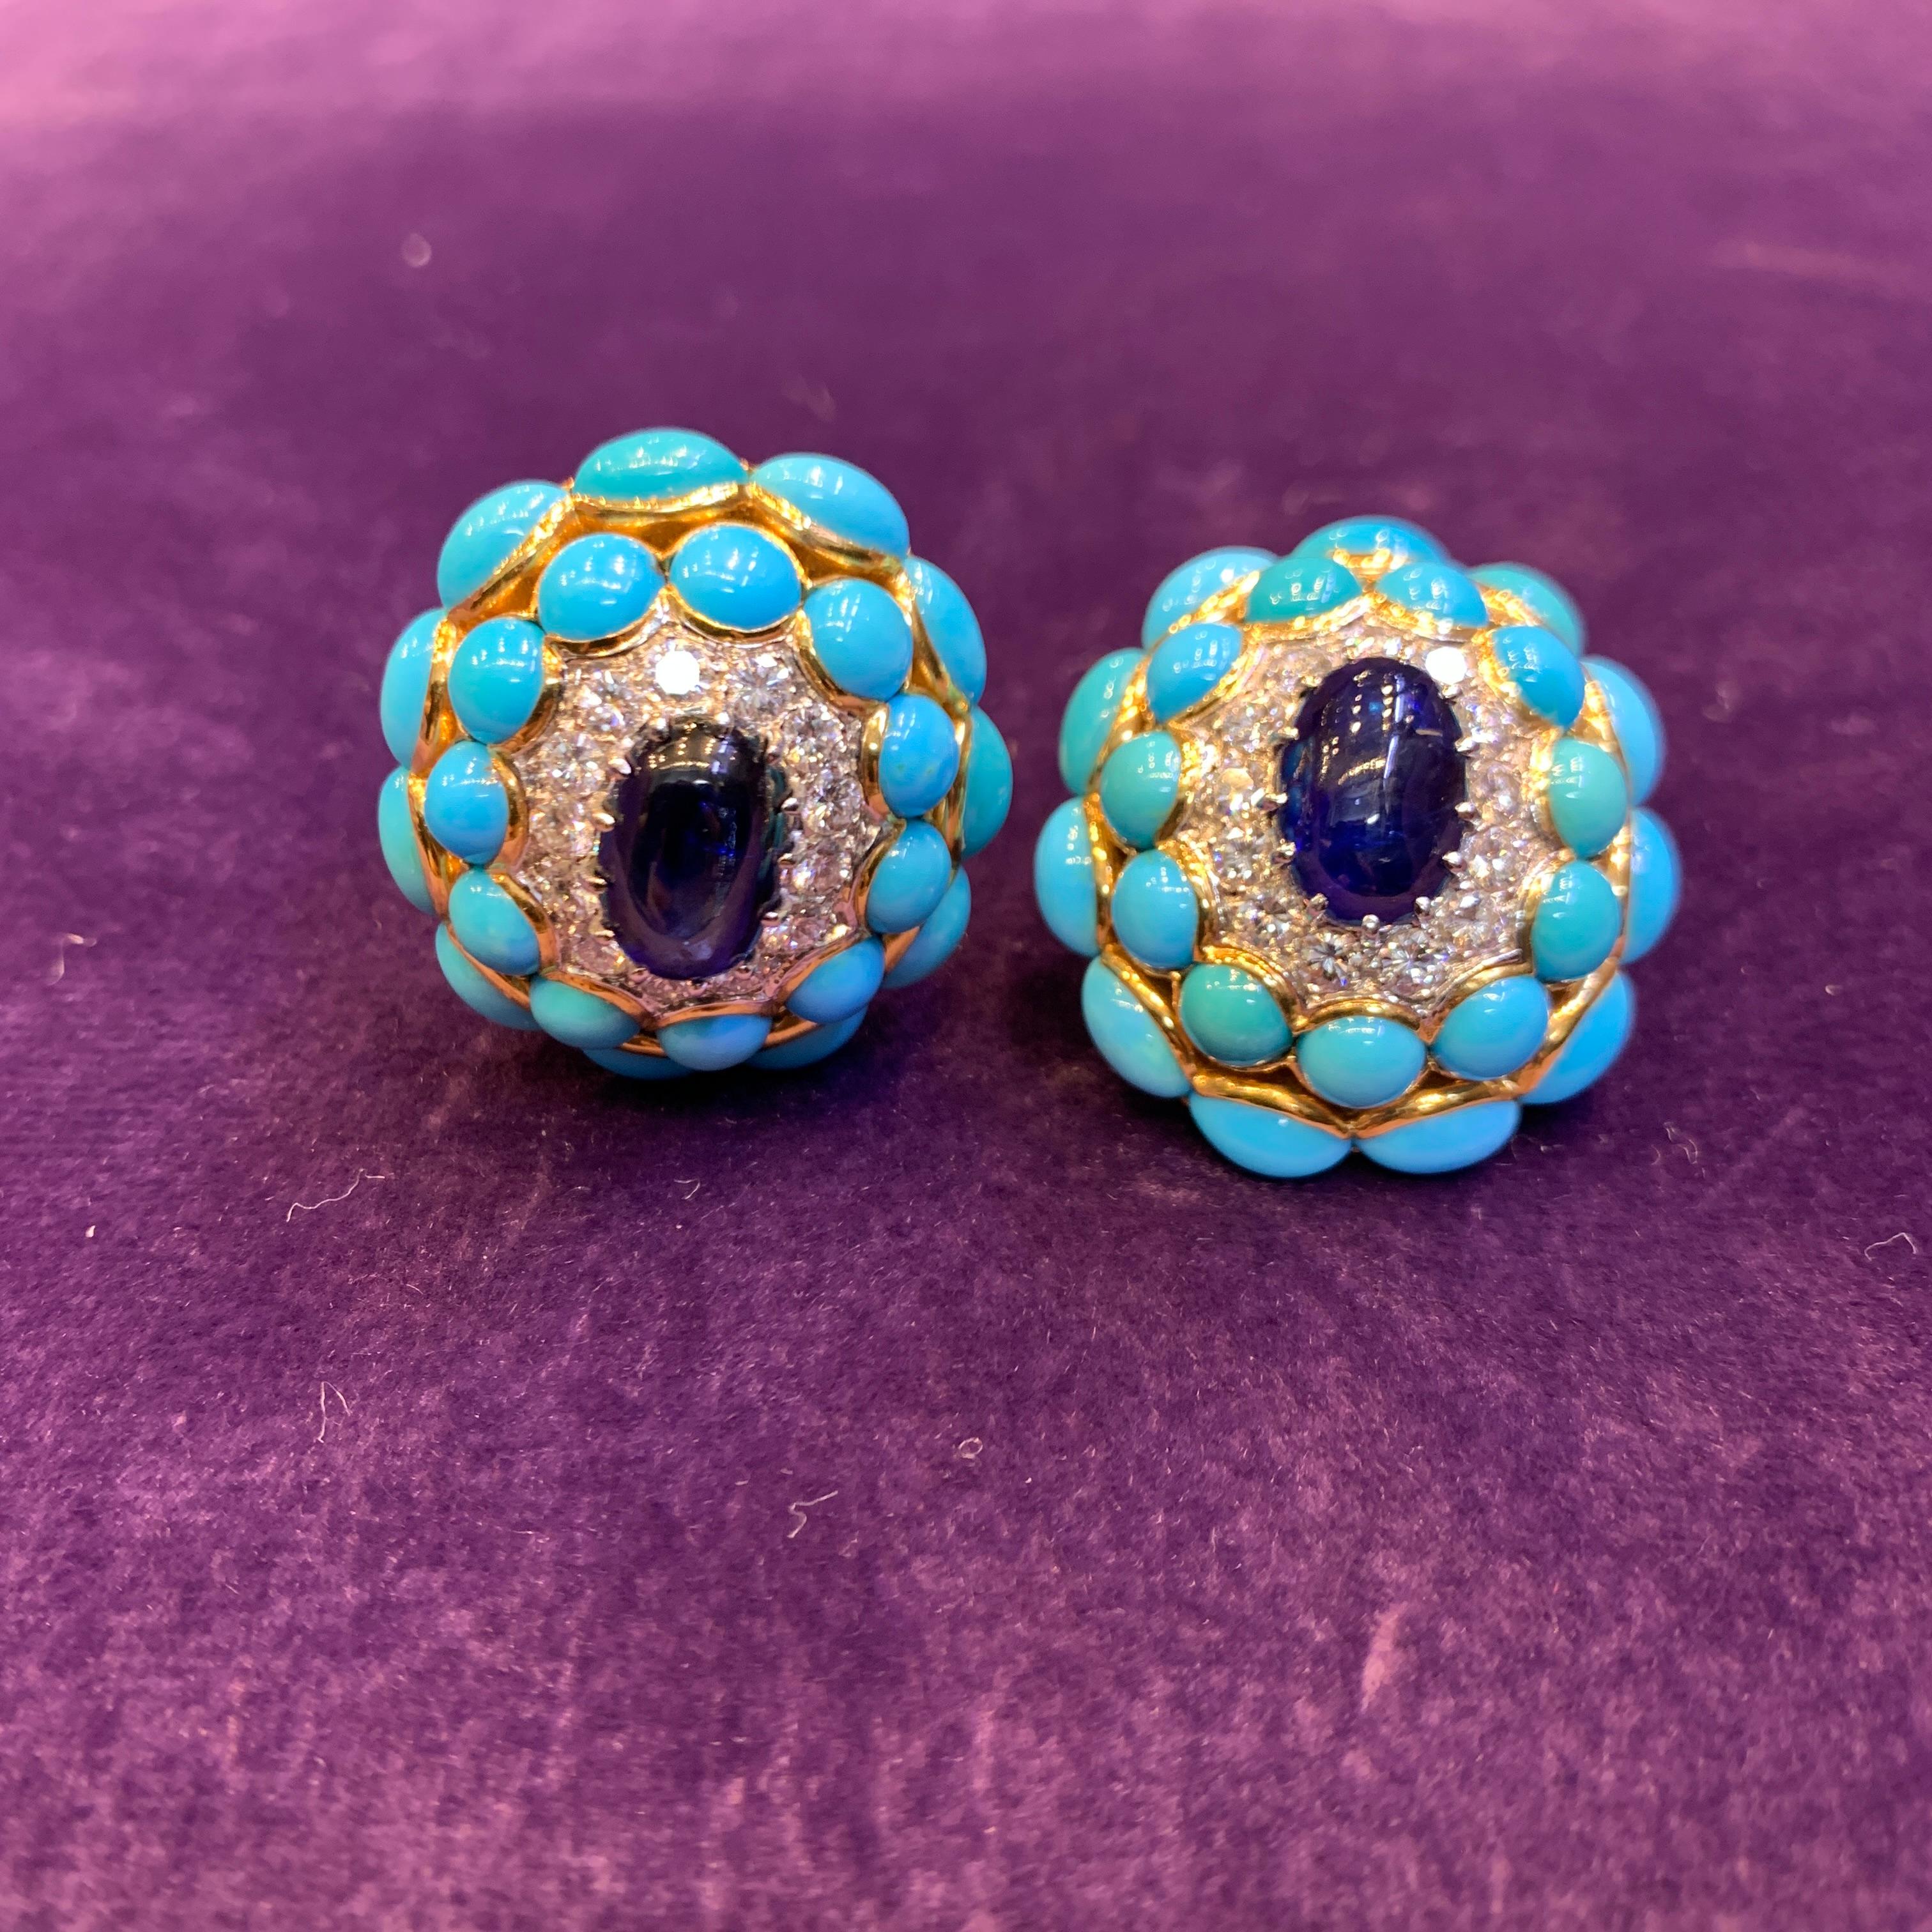 Van Cleef & Arpels Turquoise & Sapphire Earrings In Excellent Condition For Sale In New York, NY